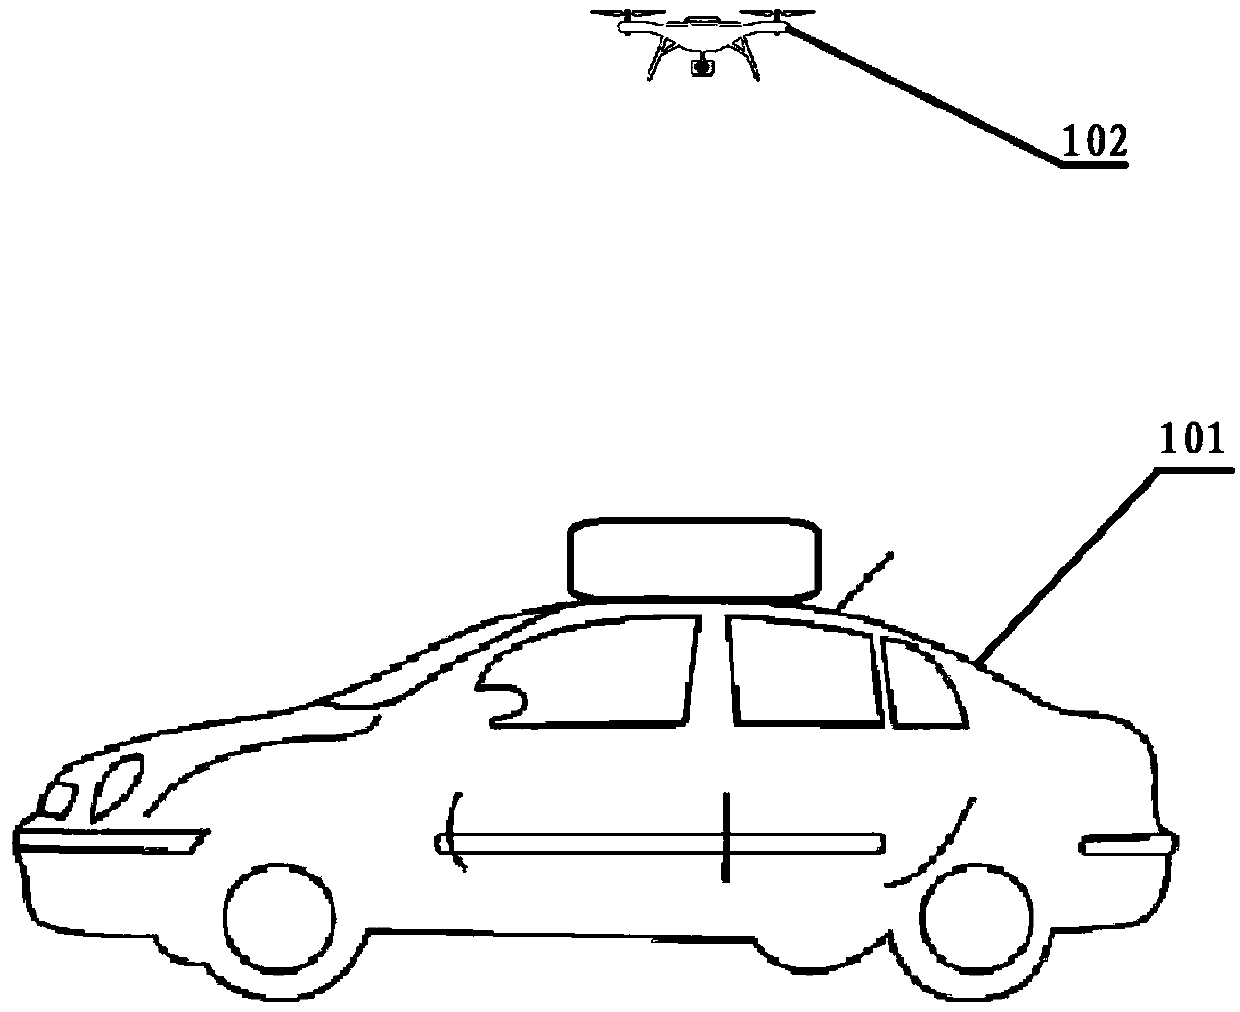 Detection system based on unmanned aerial vehicle